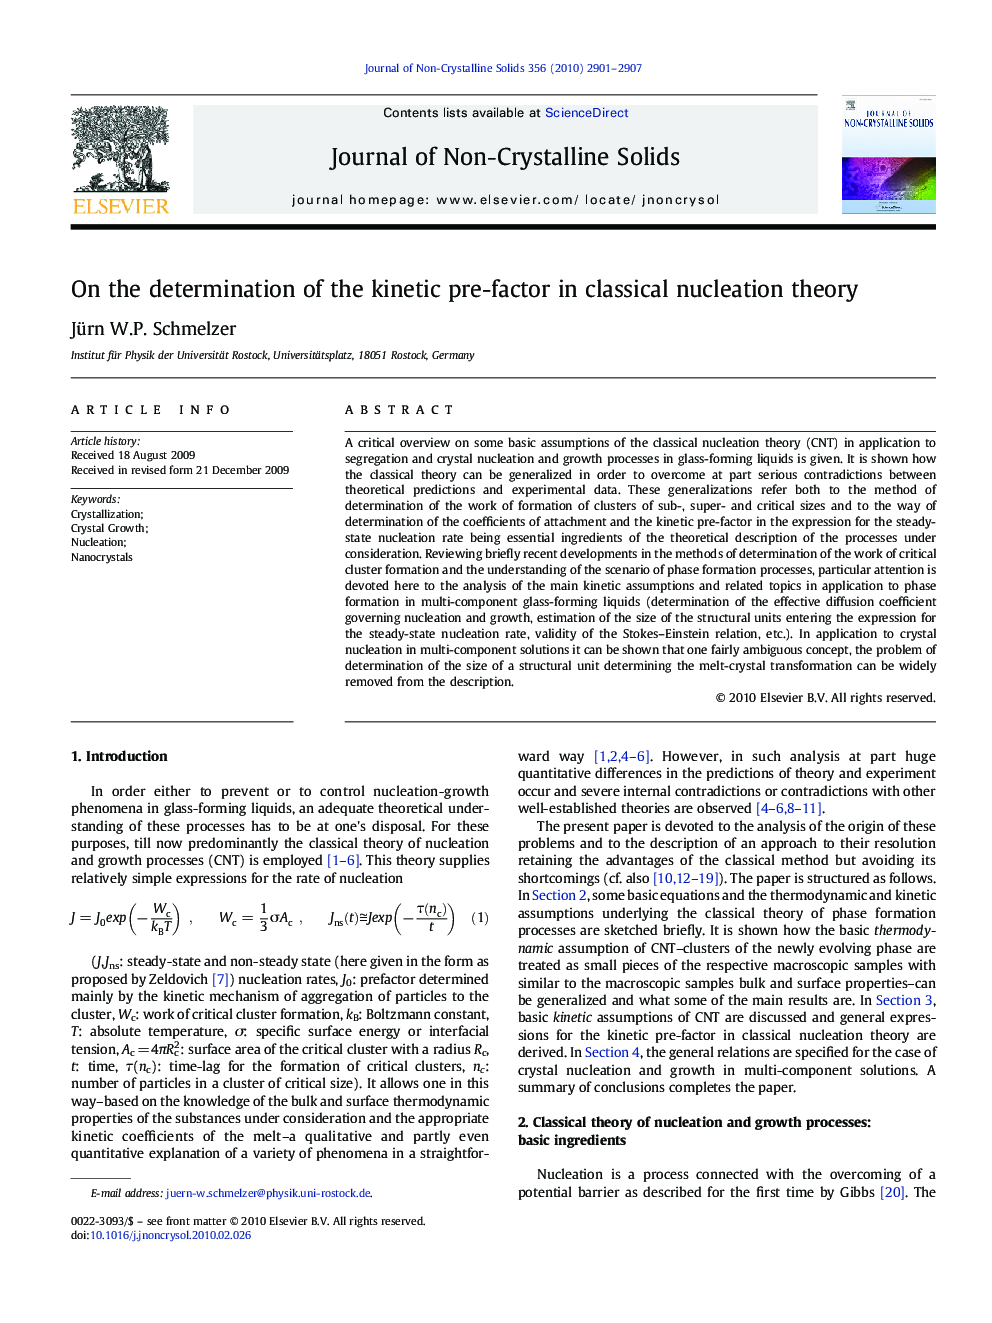 On the determination of the kinetic pre-factor in classical nucleation theory